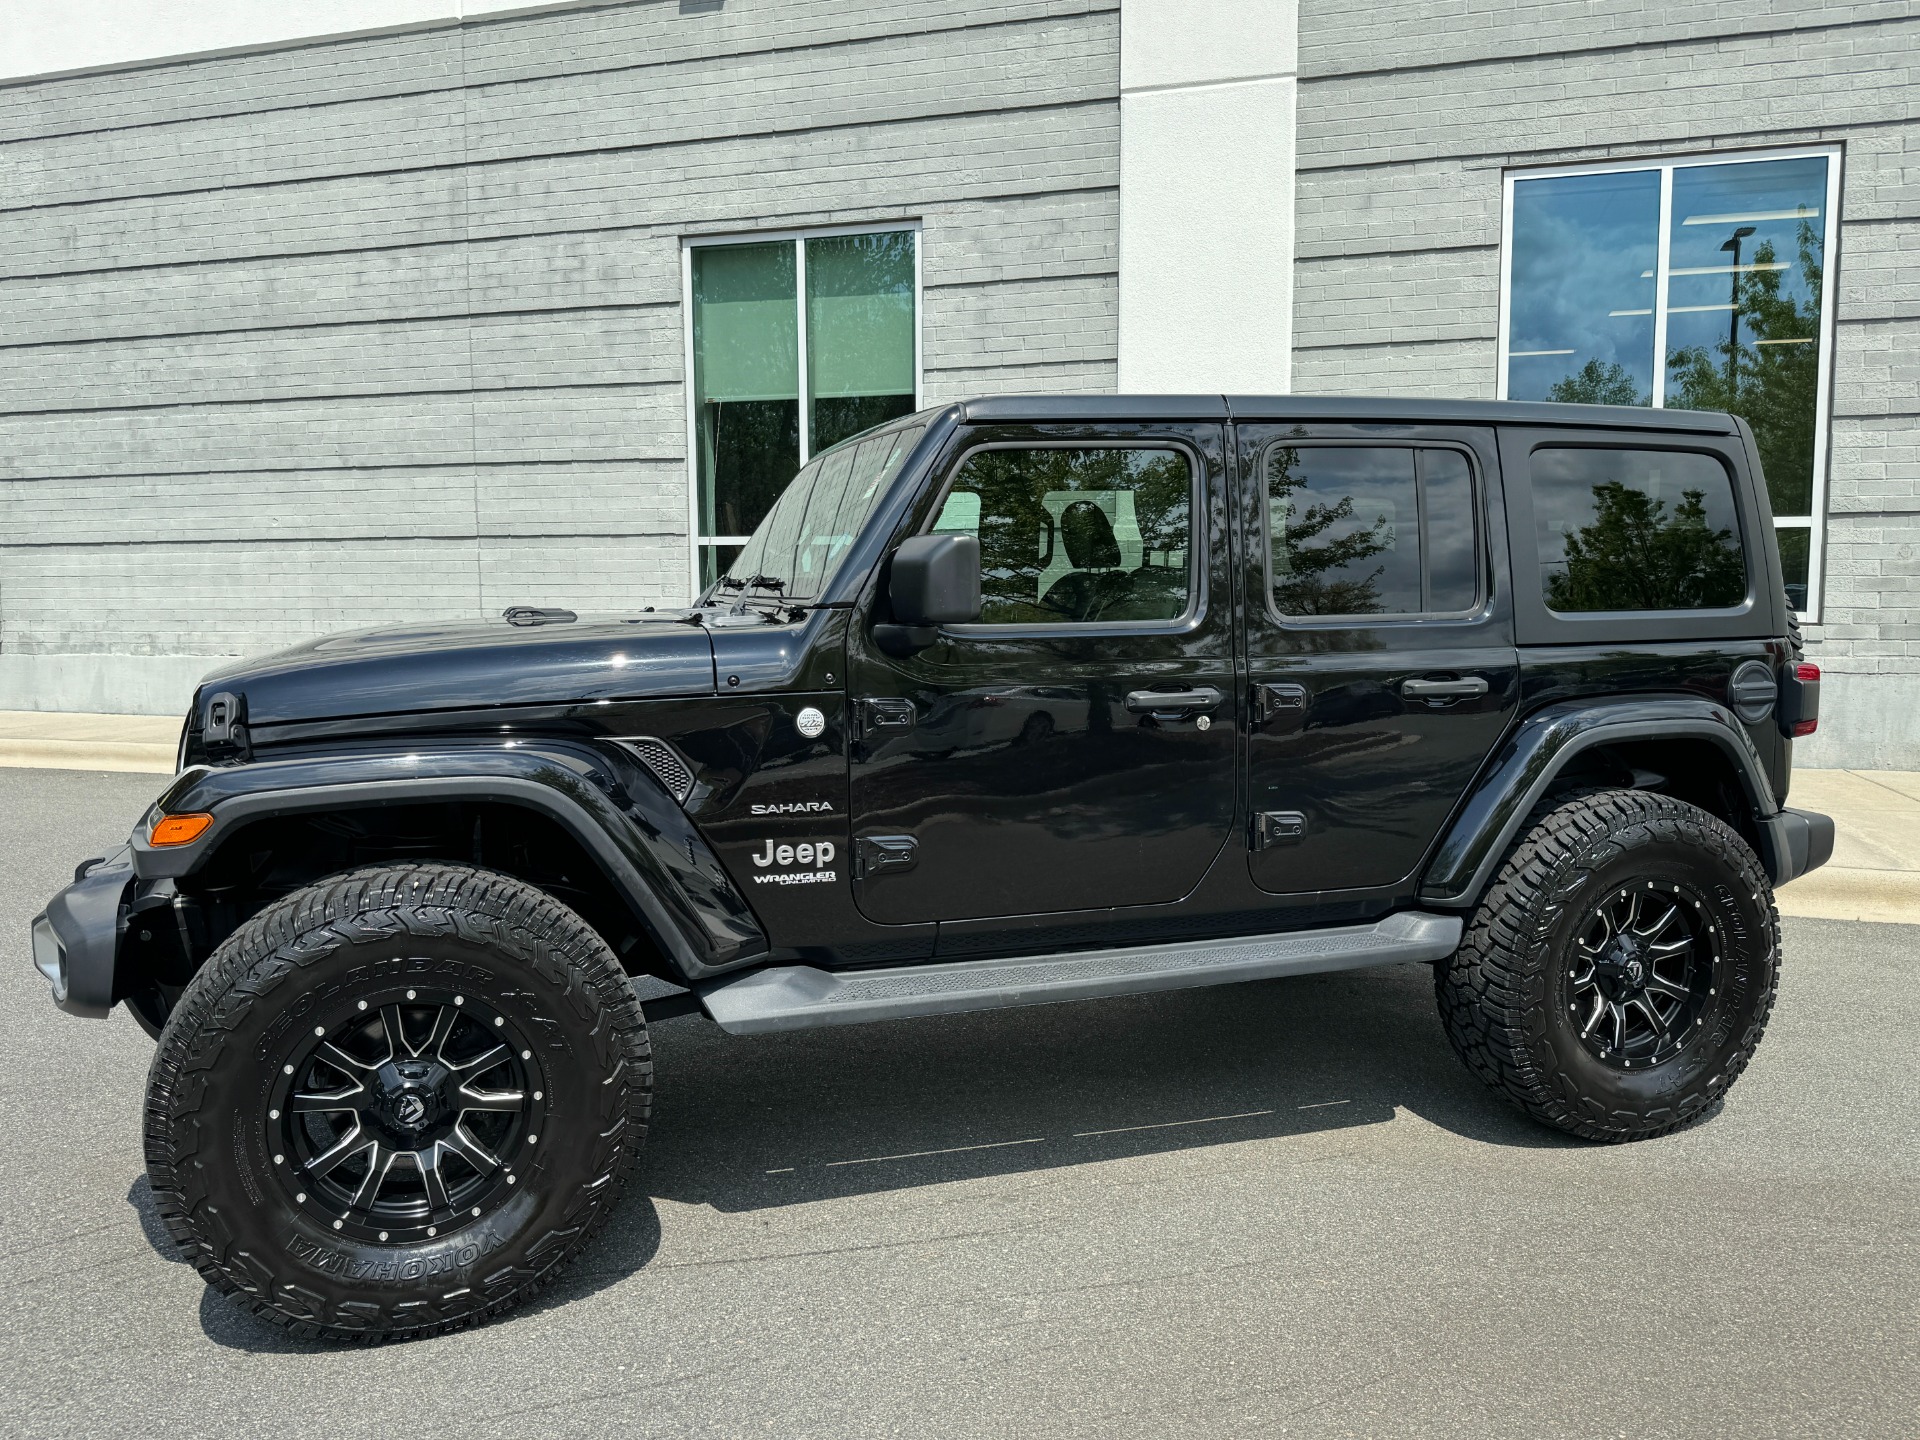 Used 2018 Jeep WRANGLER UNLIMITED SAHARA 4X4 / MANUAL / NAV / ALPINE / FREEDOM TOP / REARVIEW for sale Sold at Formula Imports in Charlotte NC 28227 5